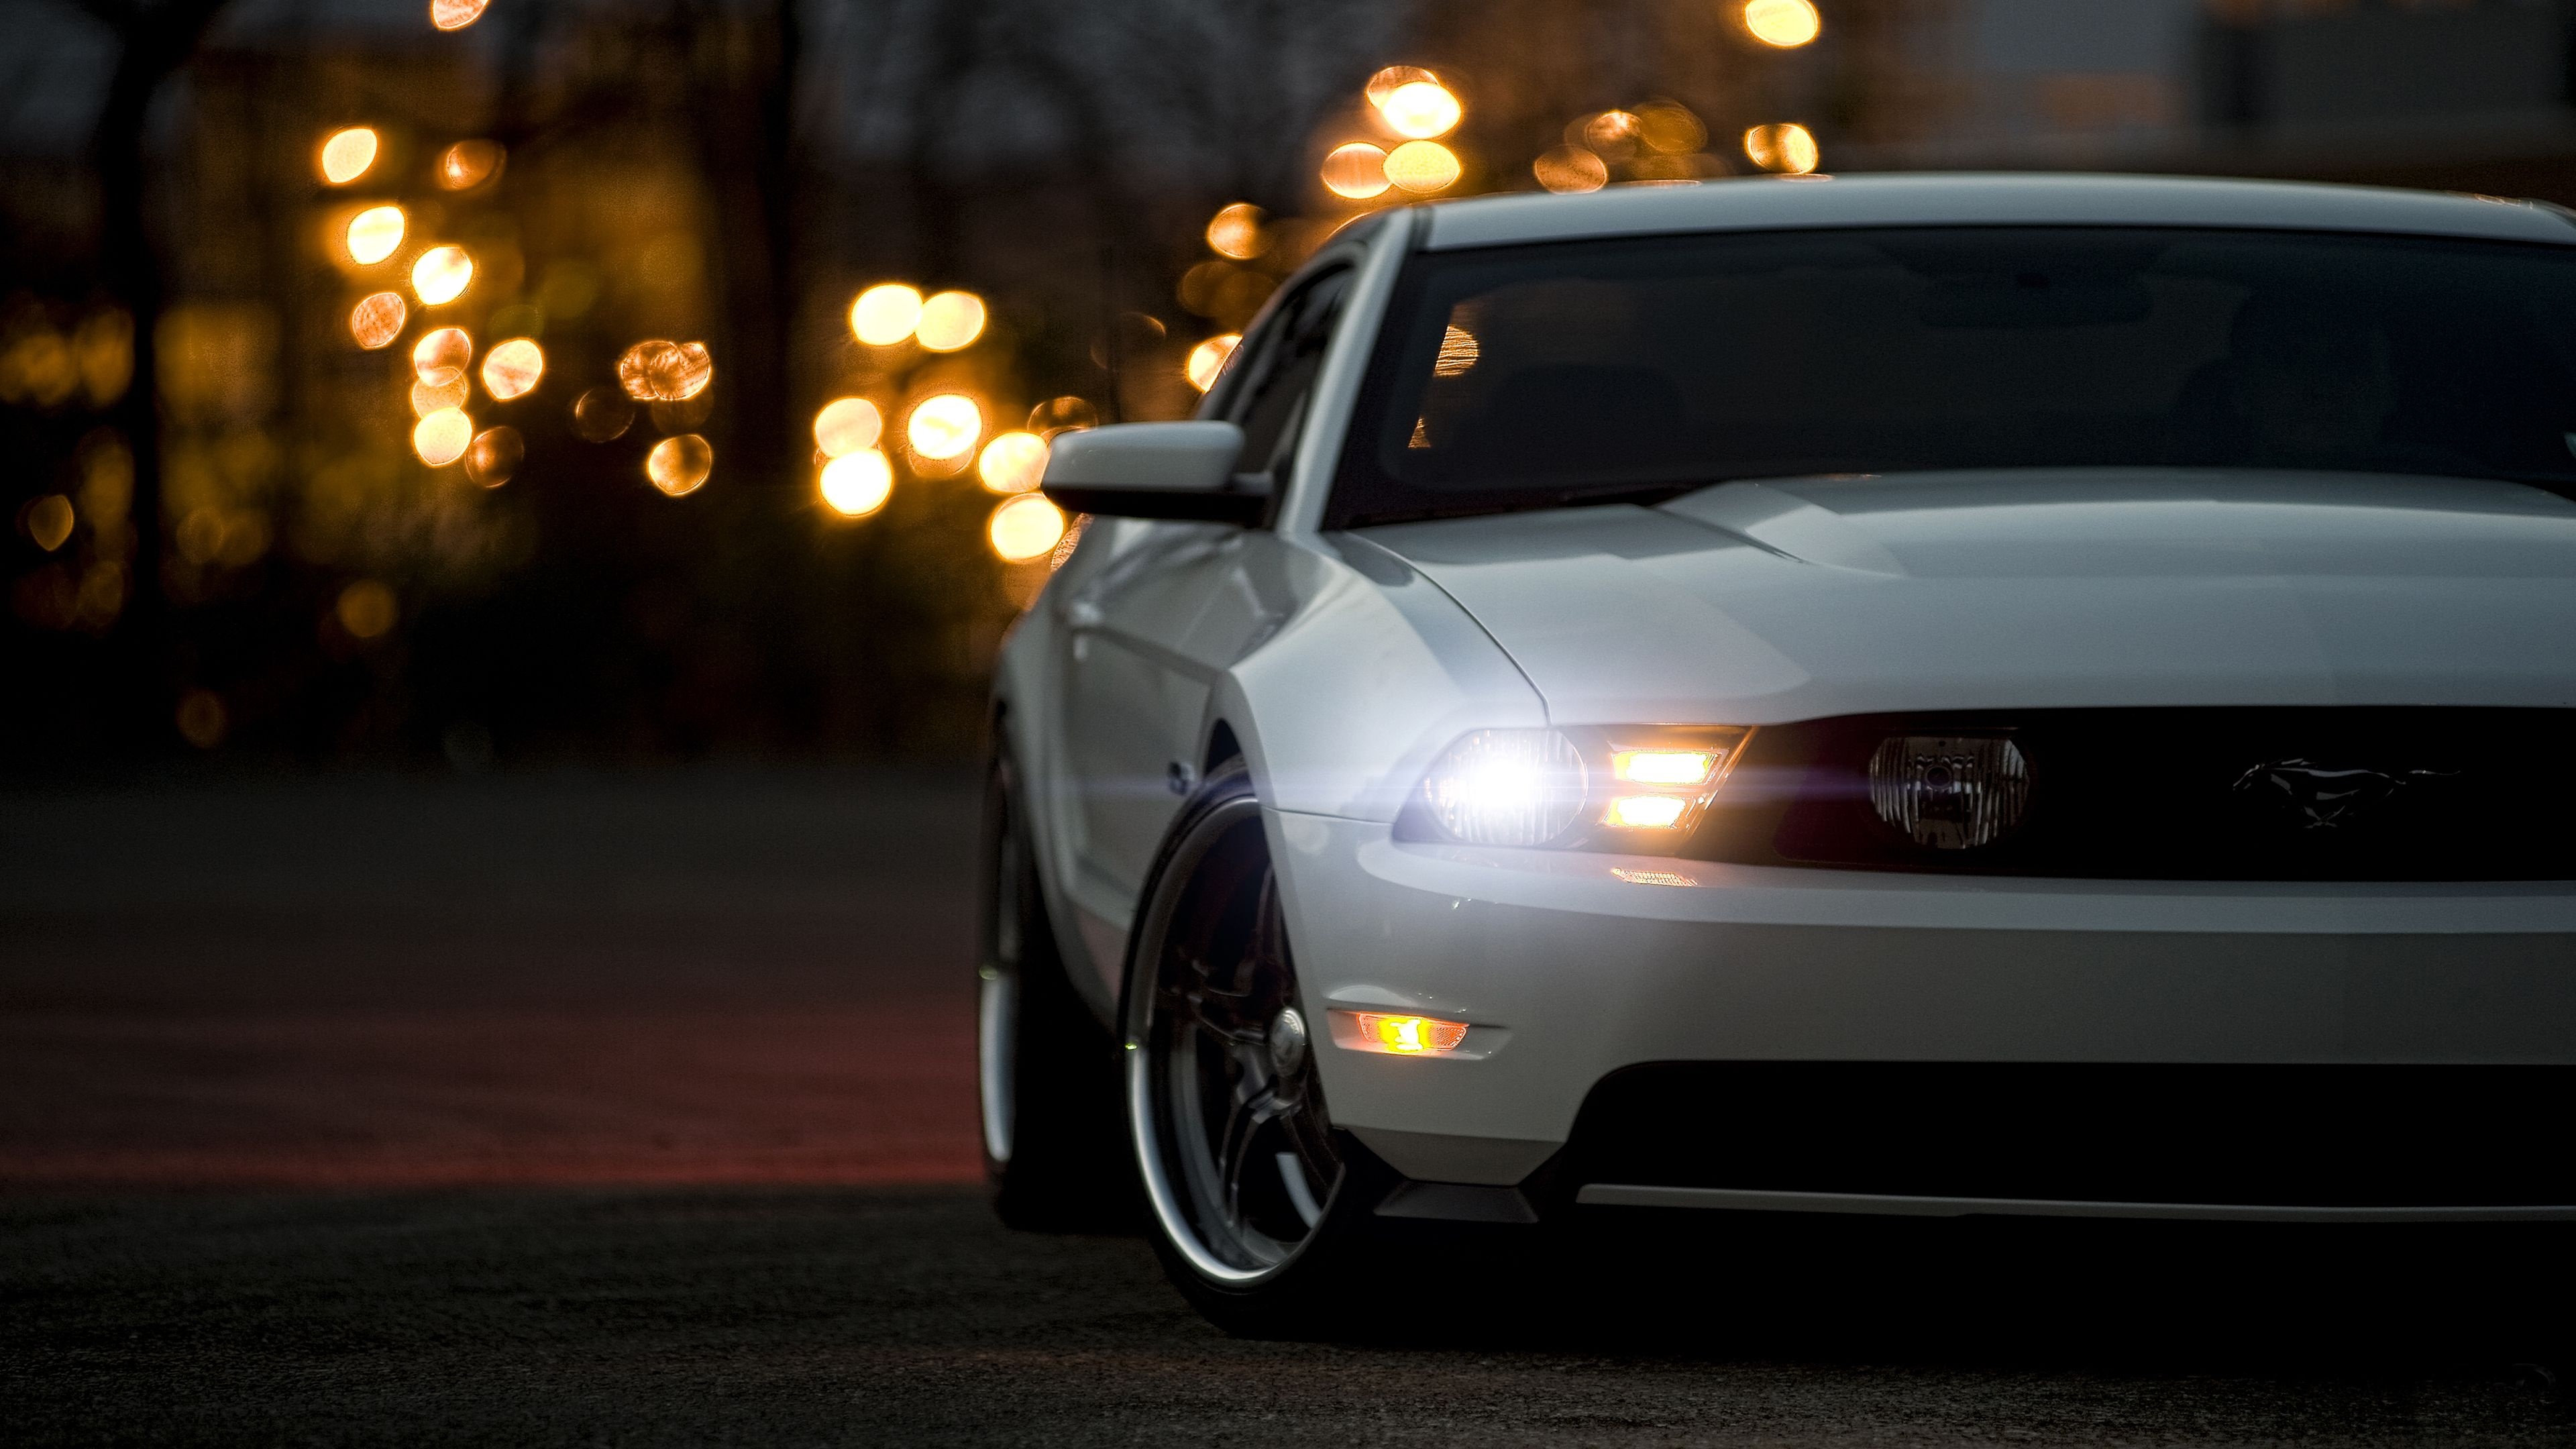 Ford Mustang: Shelby GT500 Ultra, 760-hp supercharged V-8, Coupe. 3840x2160 4K Background.